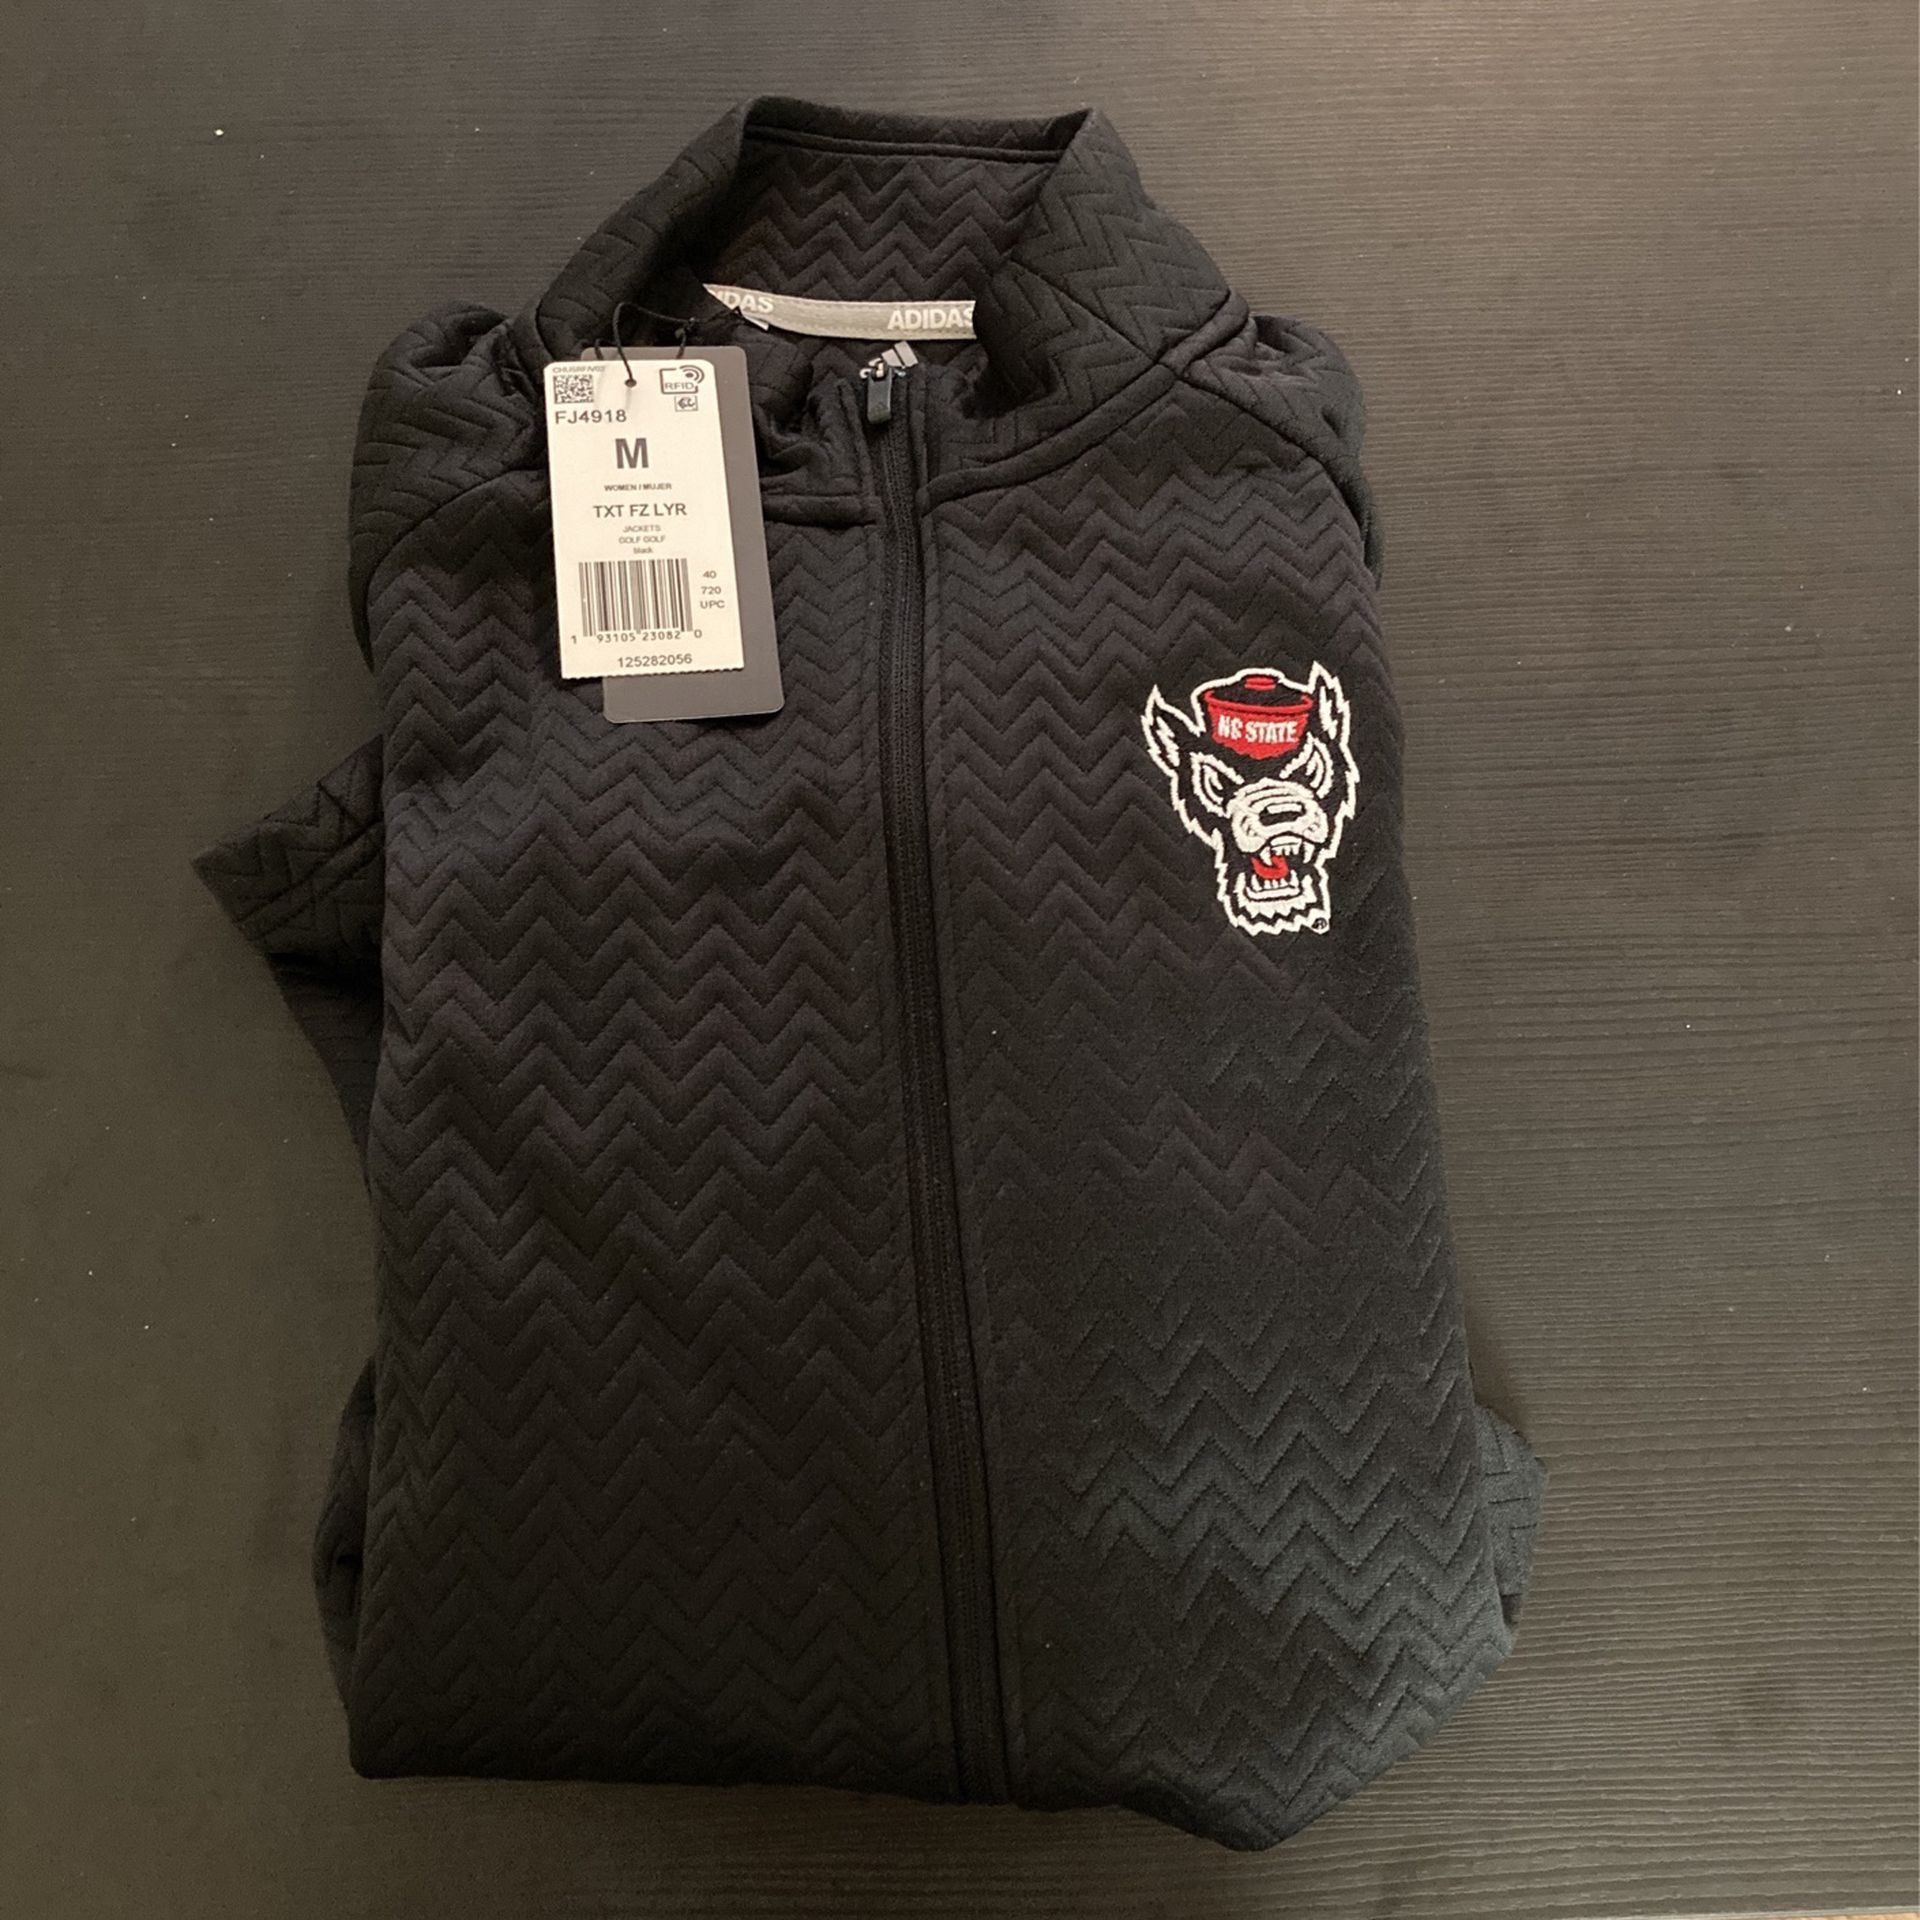 NC State women’s golf jacket (new)